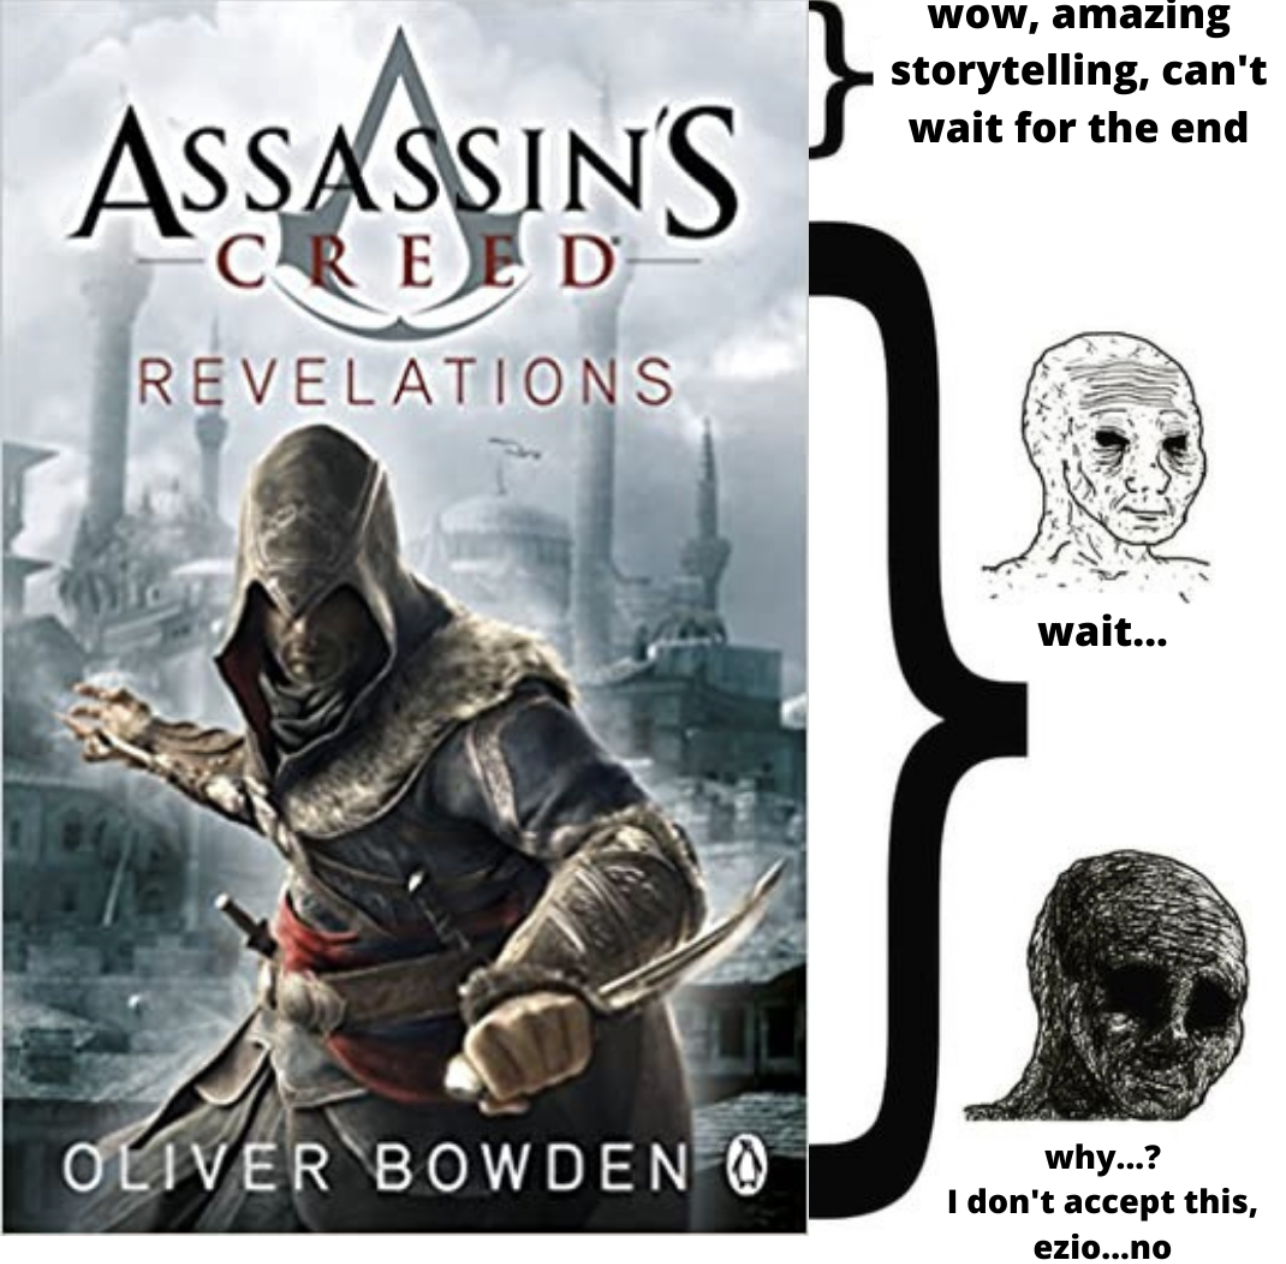 Assassin's Creed Memes - Assassin'S Creed Revelations Oliver Bowden wow, amazing storytelling, can't wait for the end wait... why...? I don't accept this, ezio...no